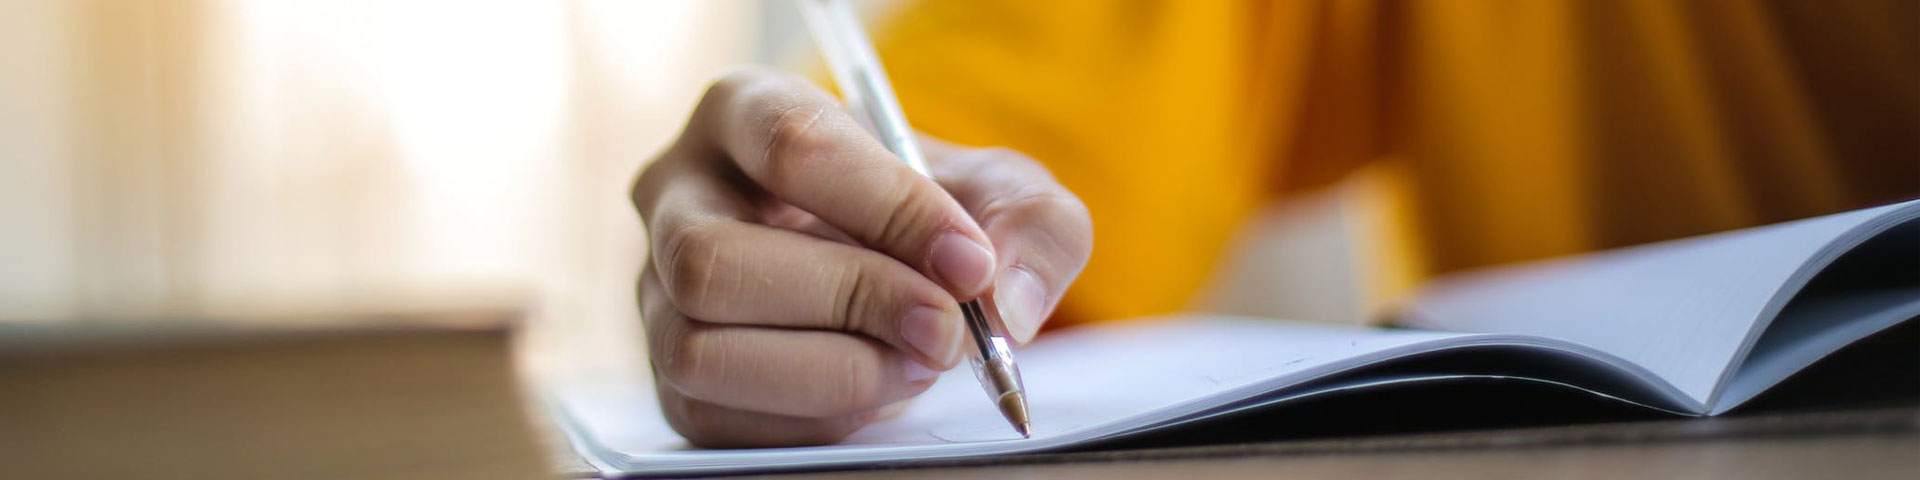 a person writing in a notebook with biro